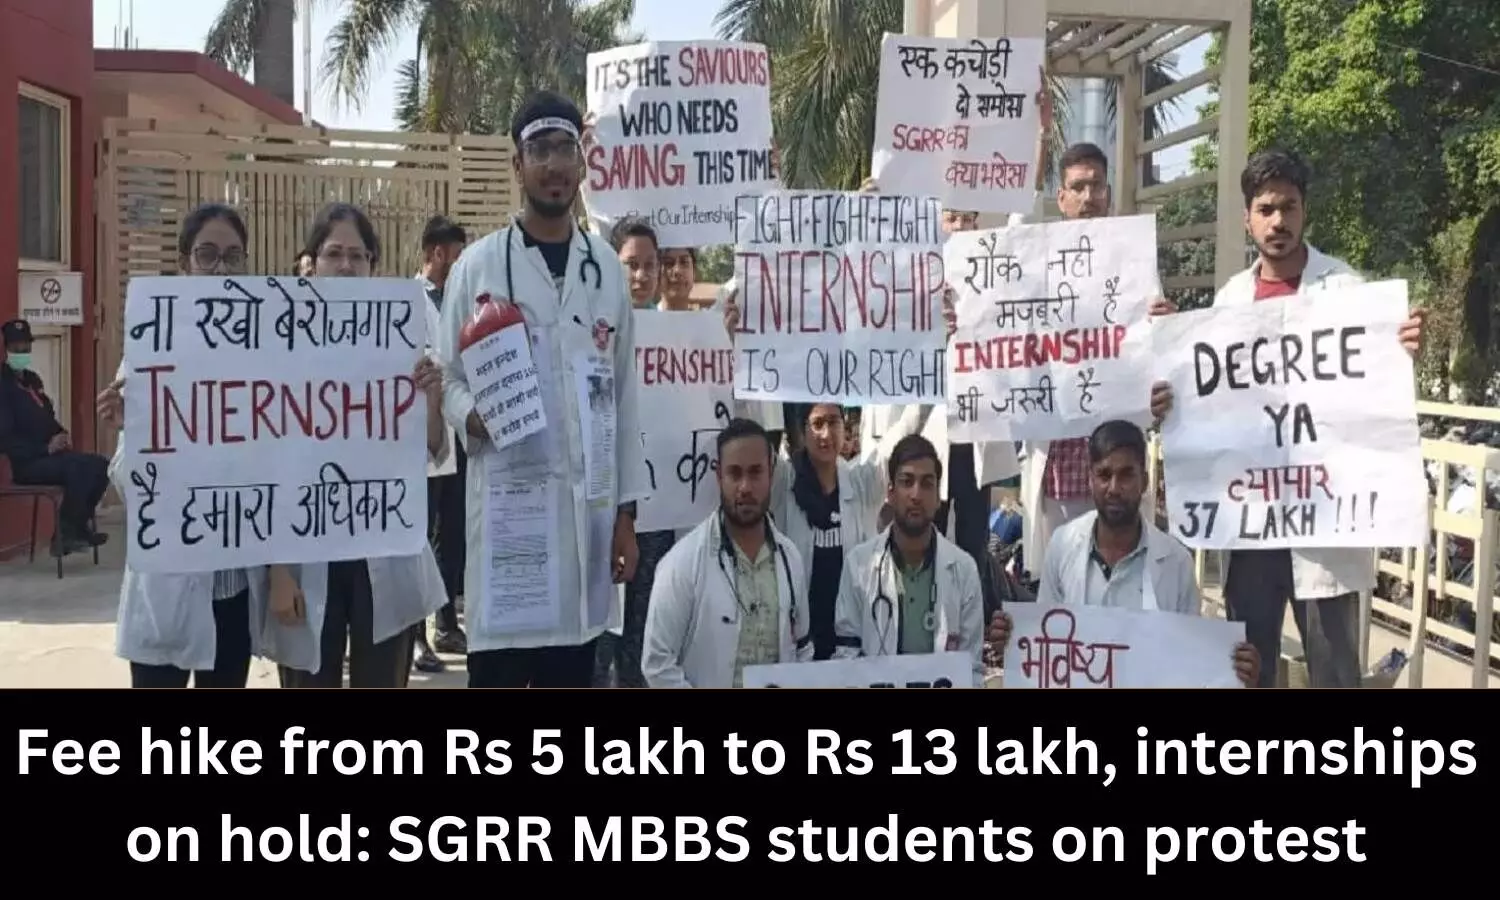 MBBS students of SGRR on protest over fee hike